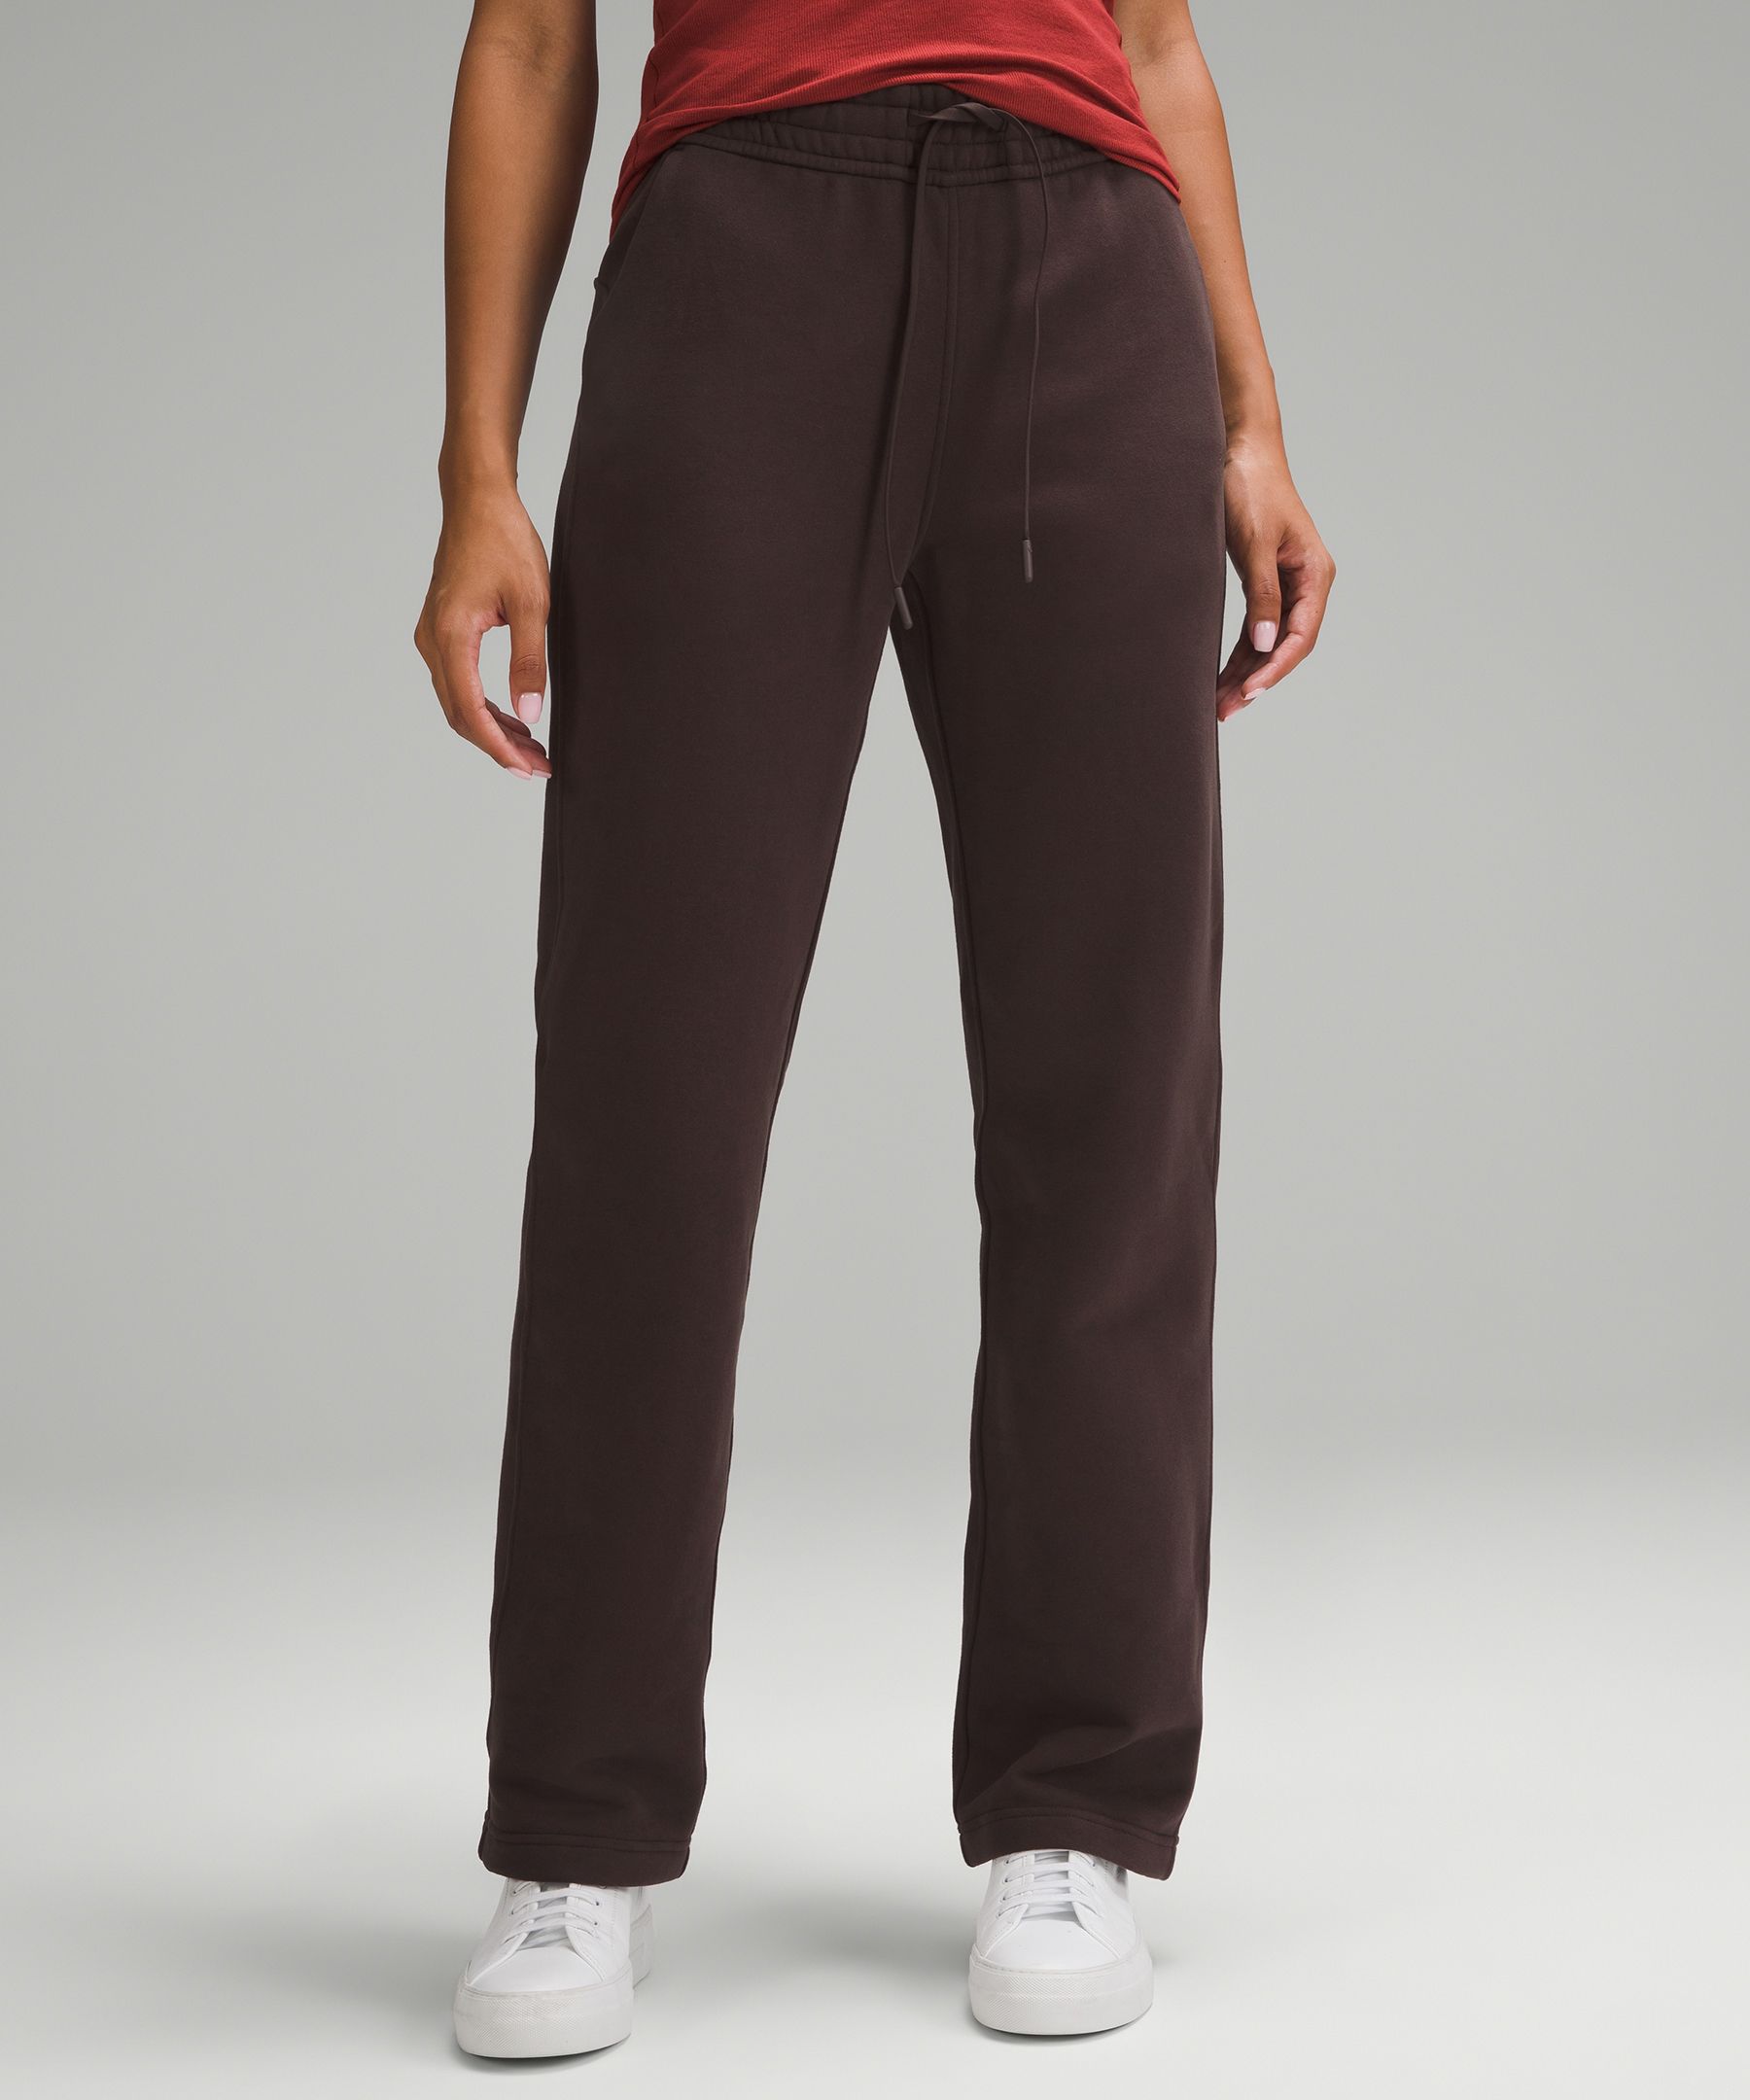 Loungeful Straight Leg Pant opinions? Does anyone have these to